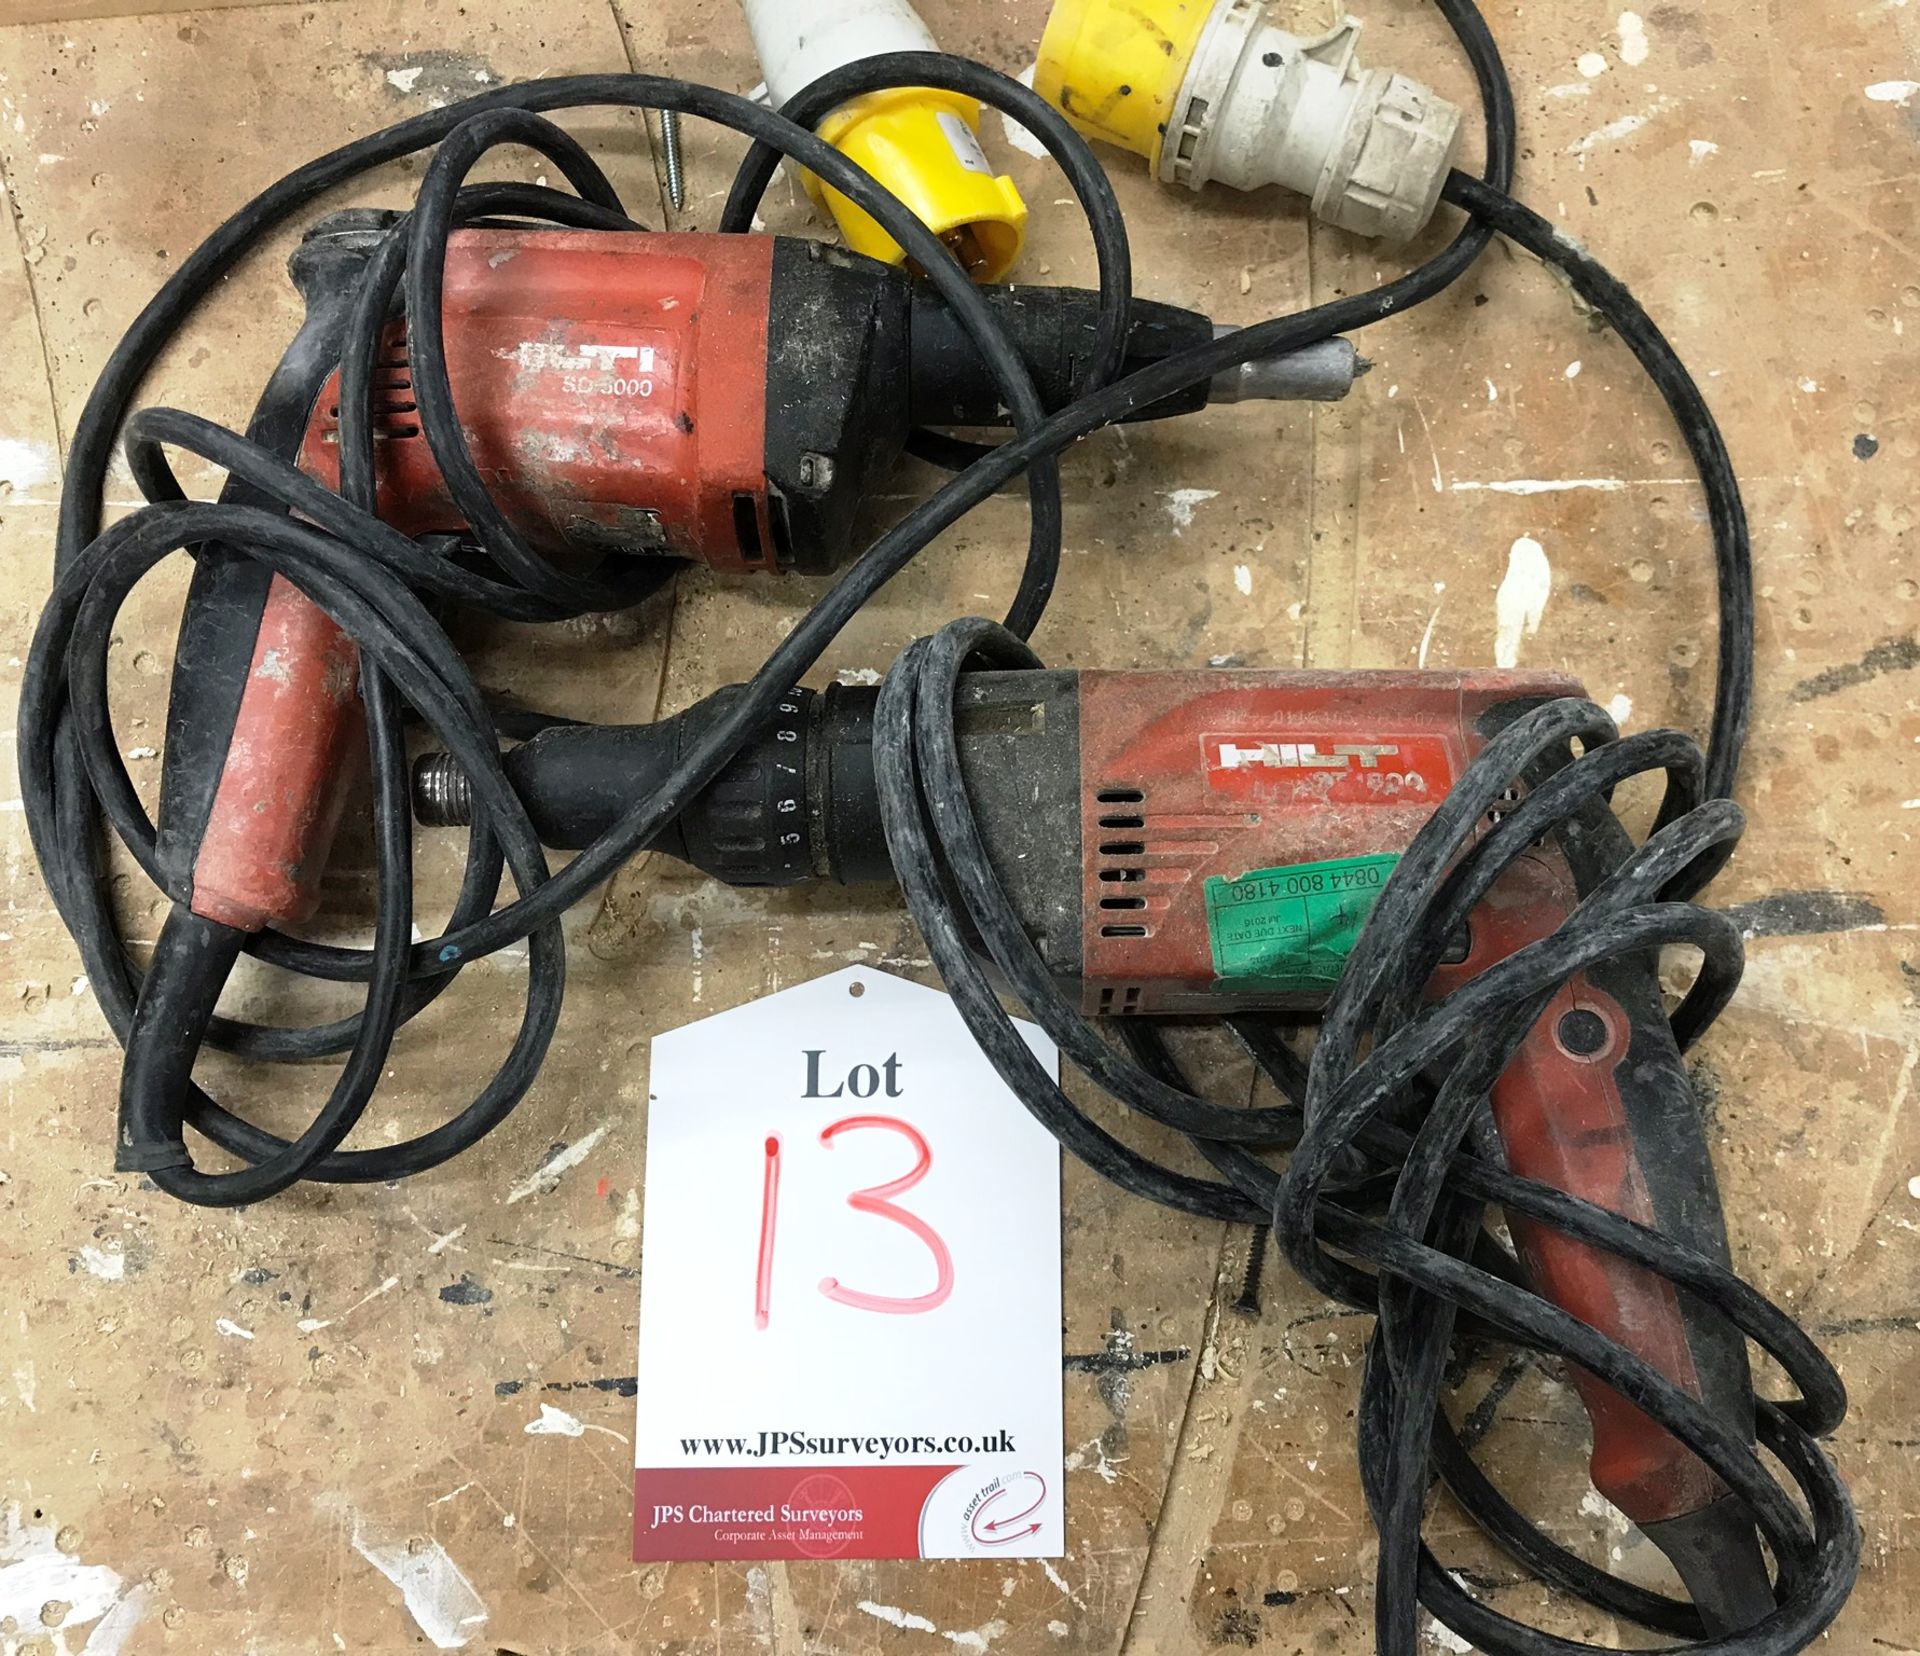 2 x Various Hilti Power Tools 110V - As pictured